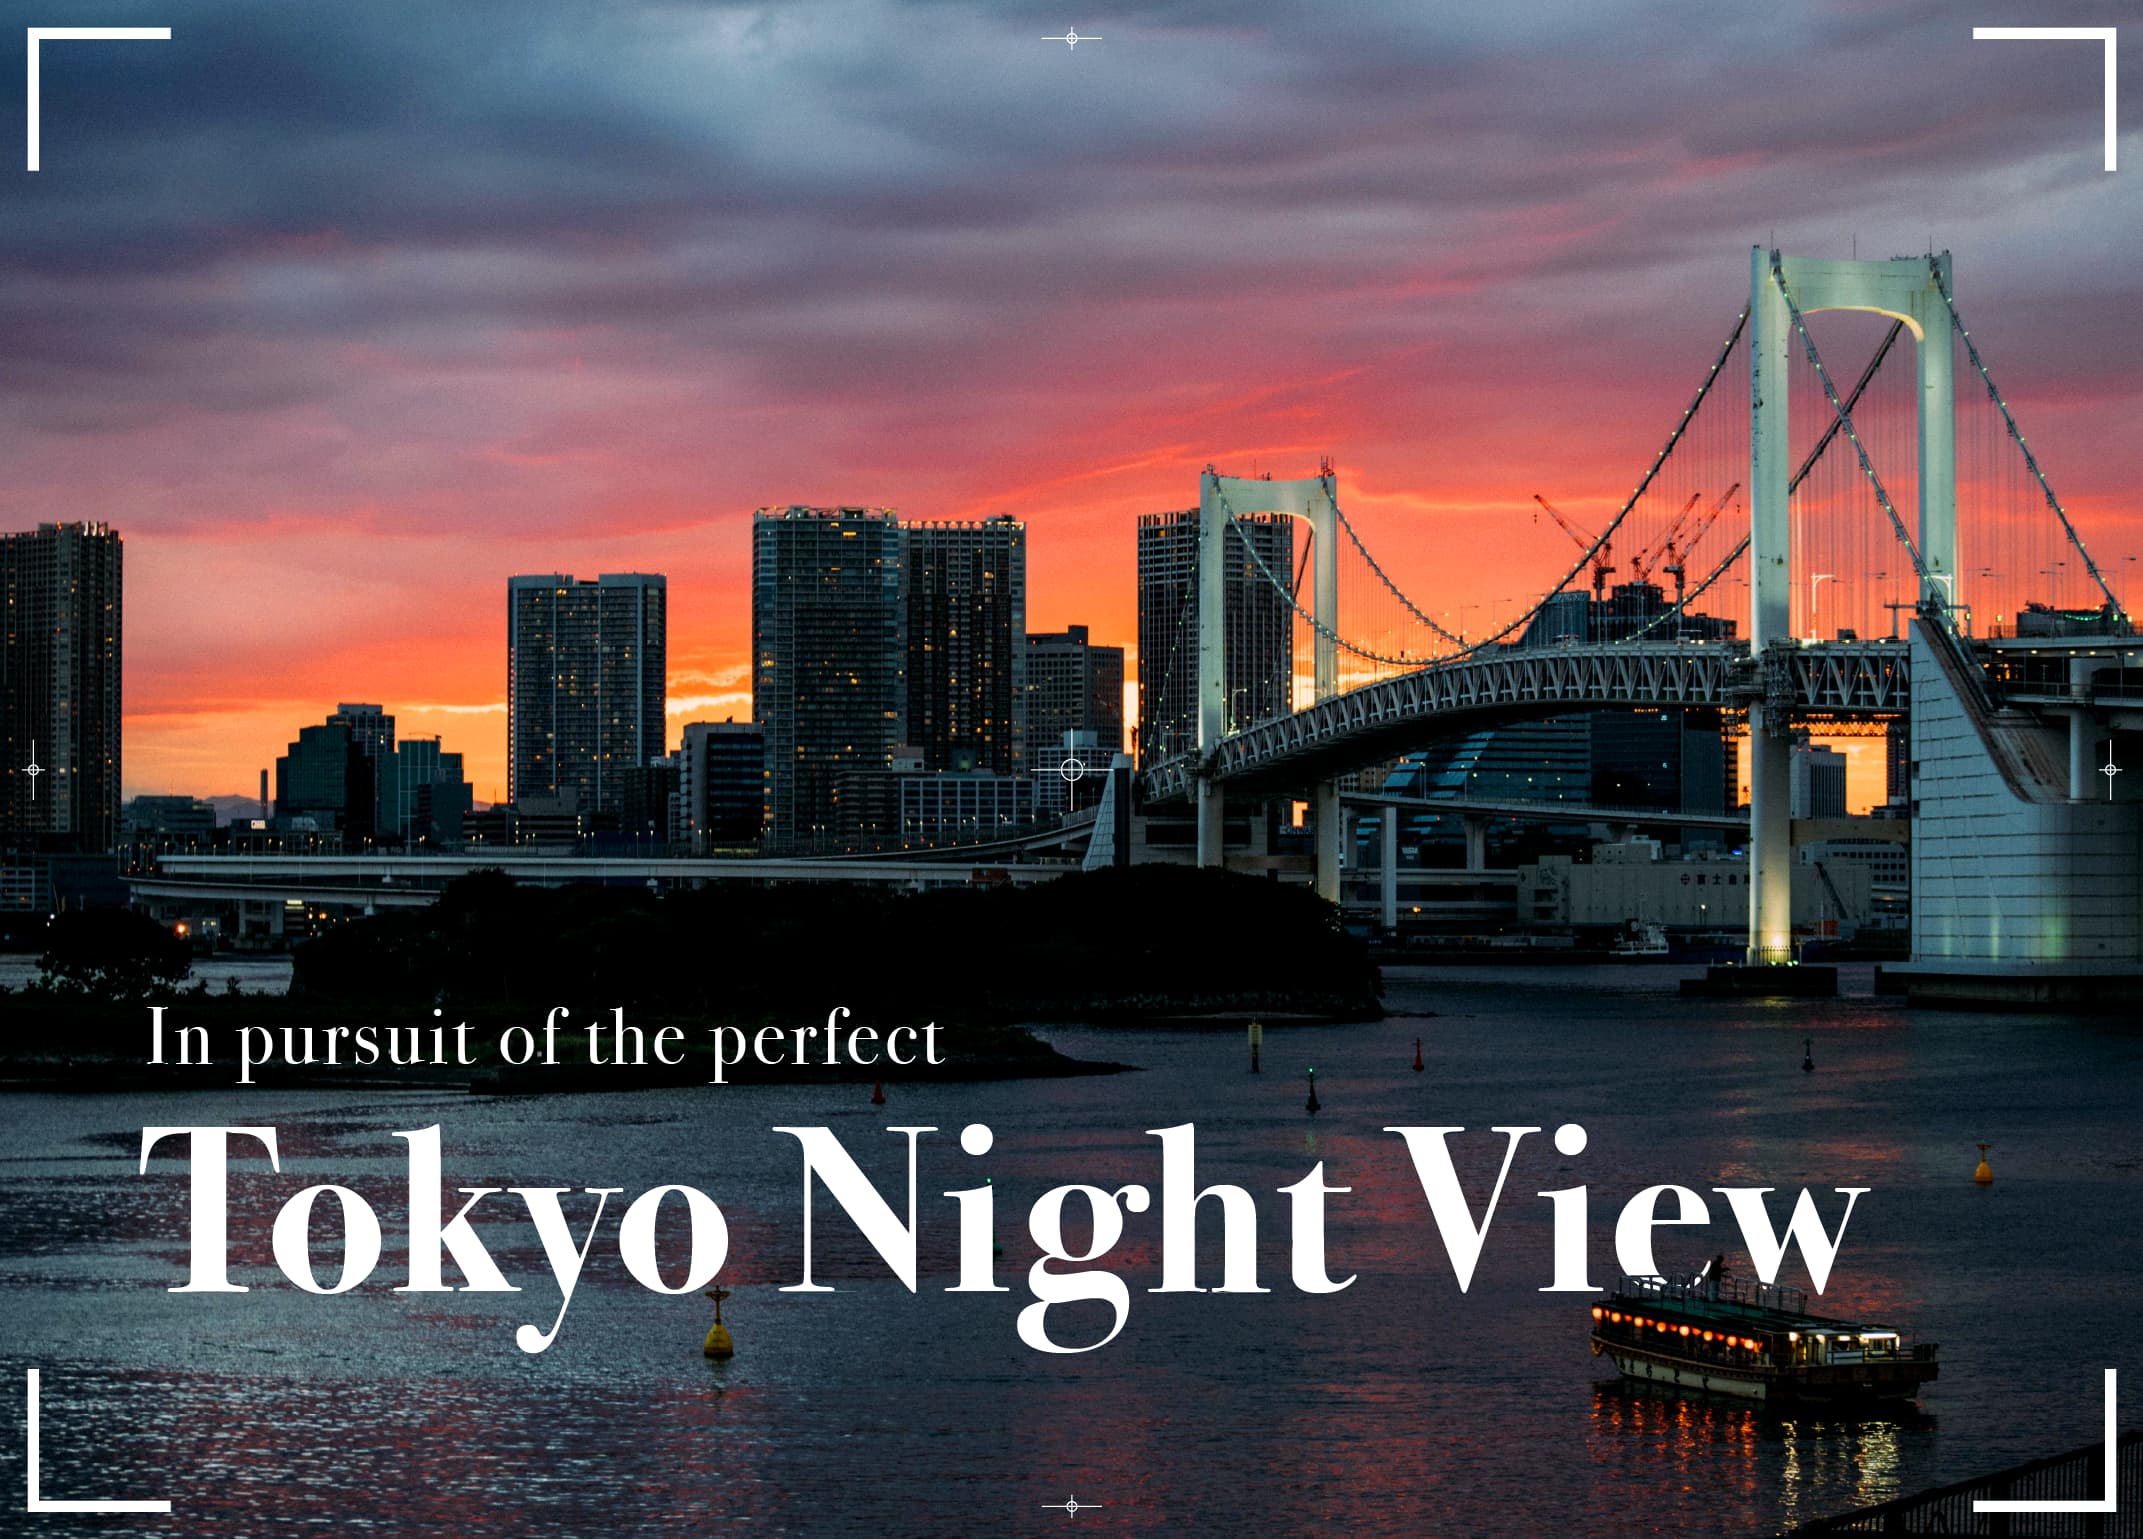 In pursuit of the perfect Tokyo Night View